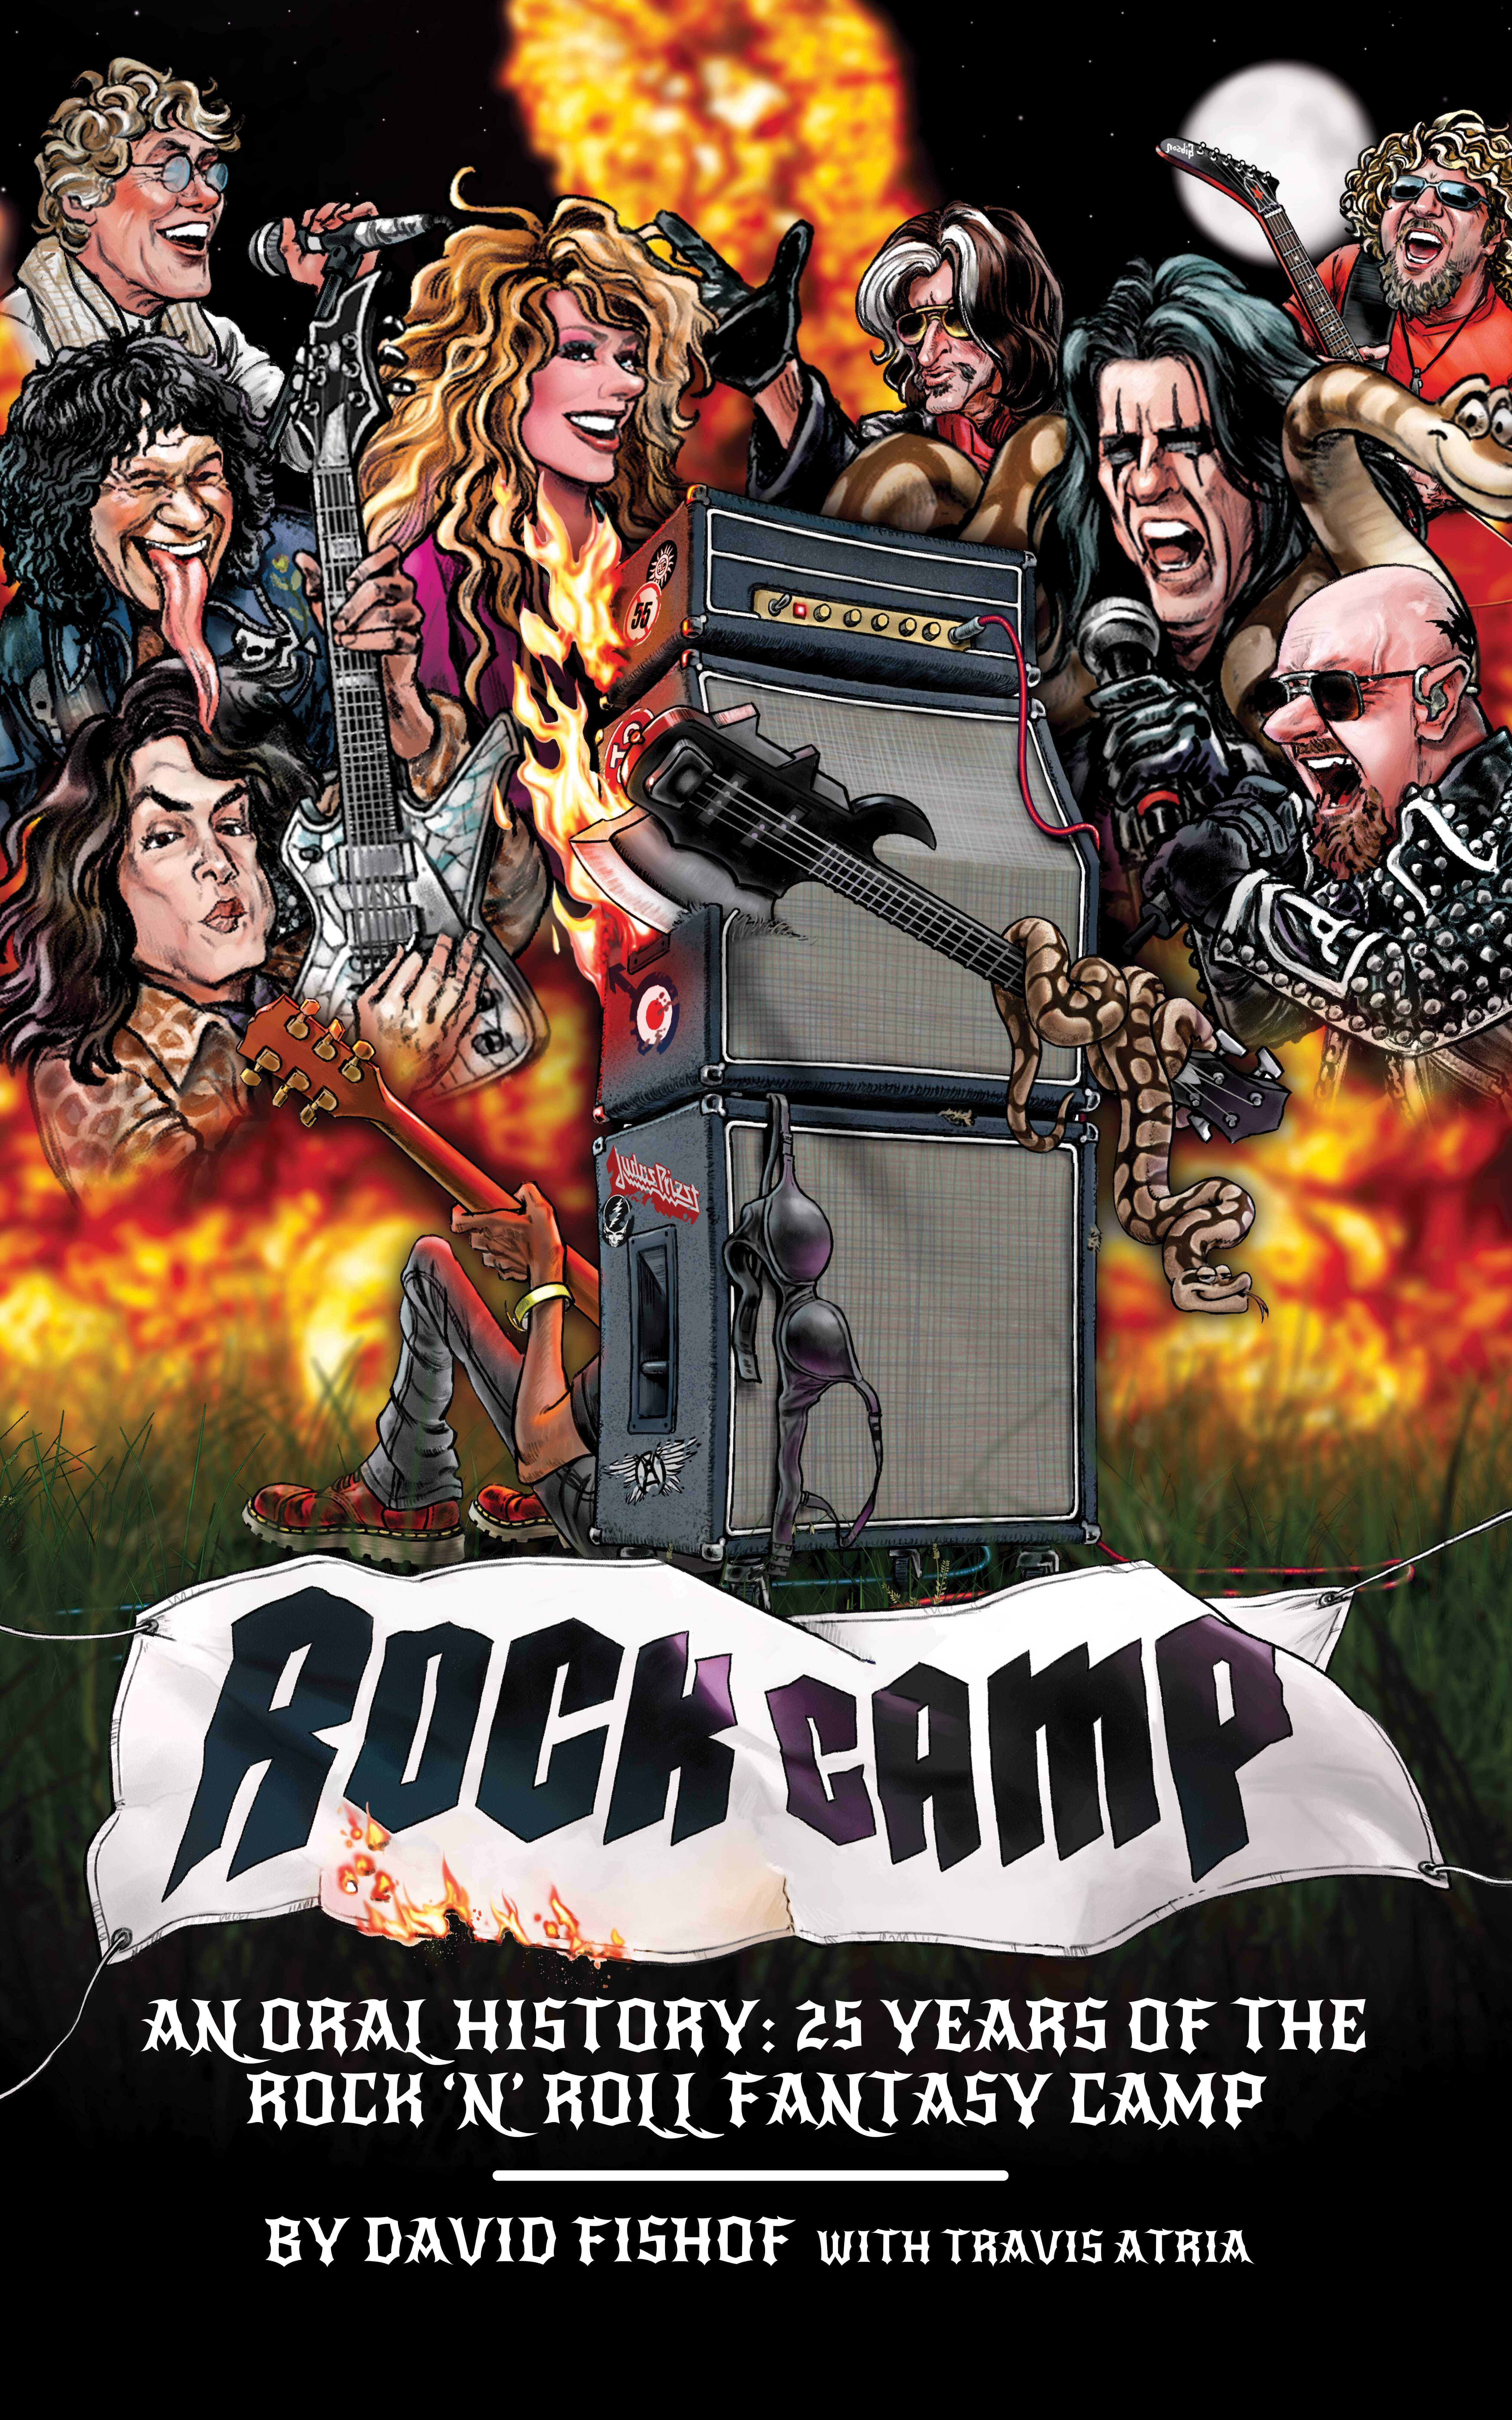 Rock 'n' Roll Fantasy Camp Releases Hardcover This Winter